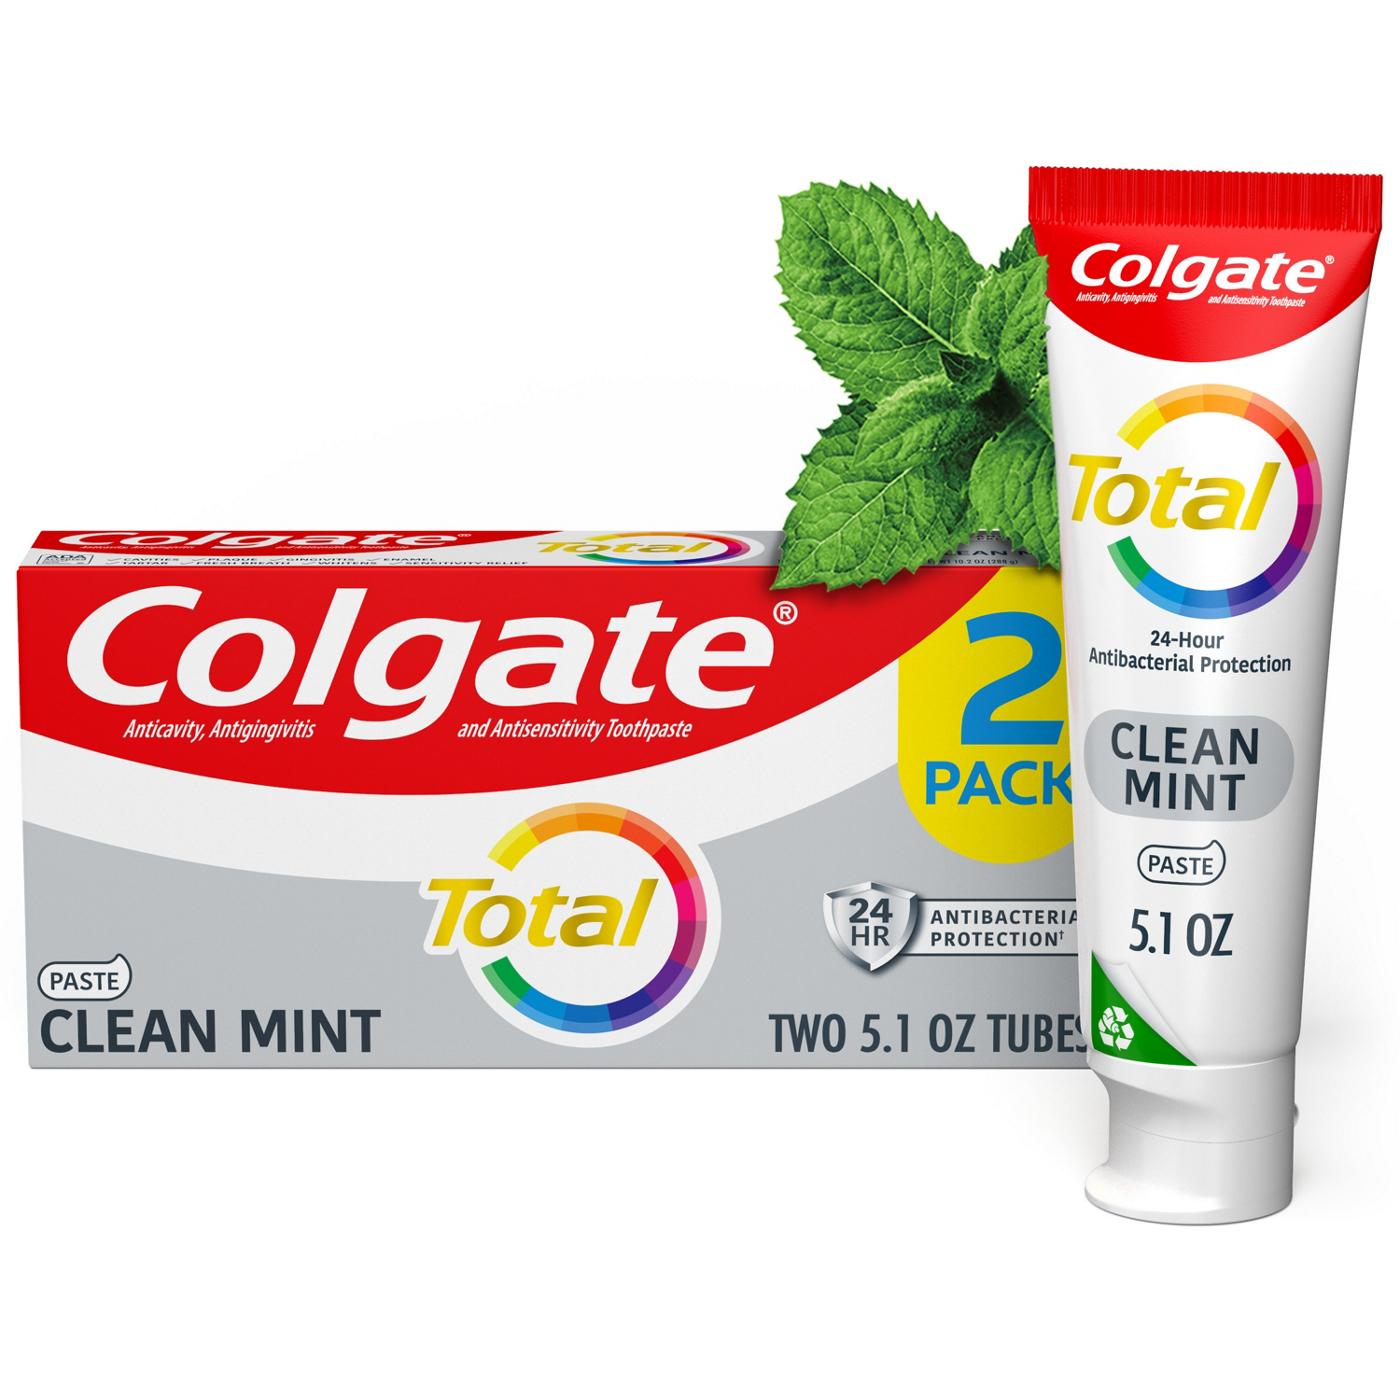 Colgate Total Toothpaste - Clean Mint, 2 Pk; image 9 of 18